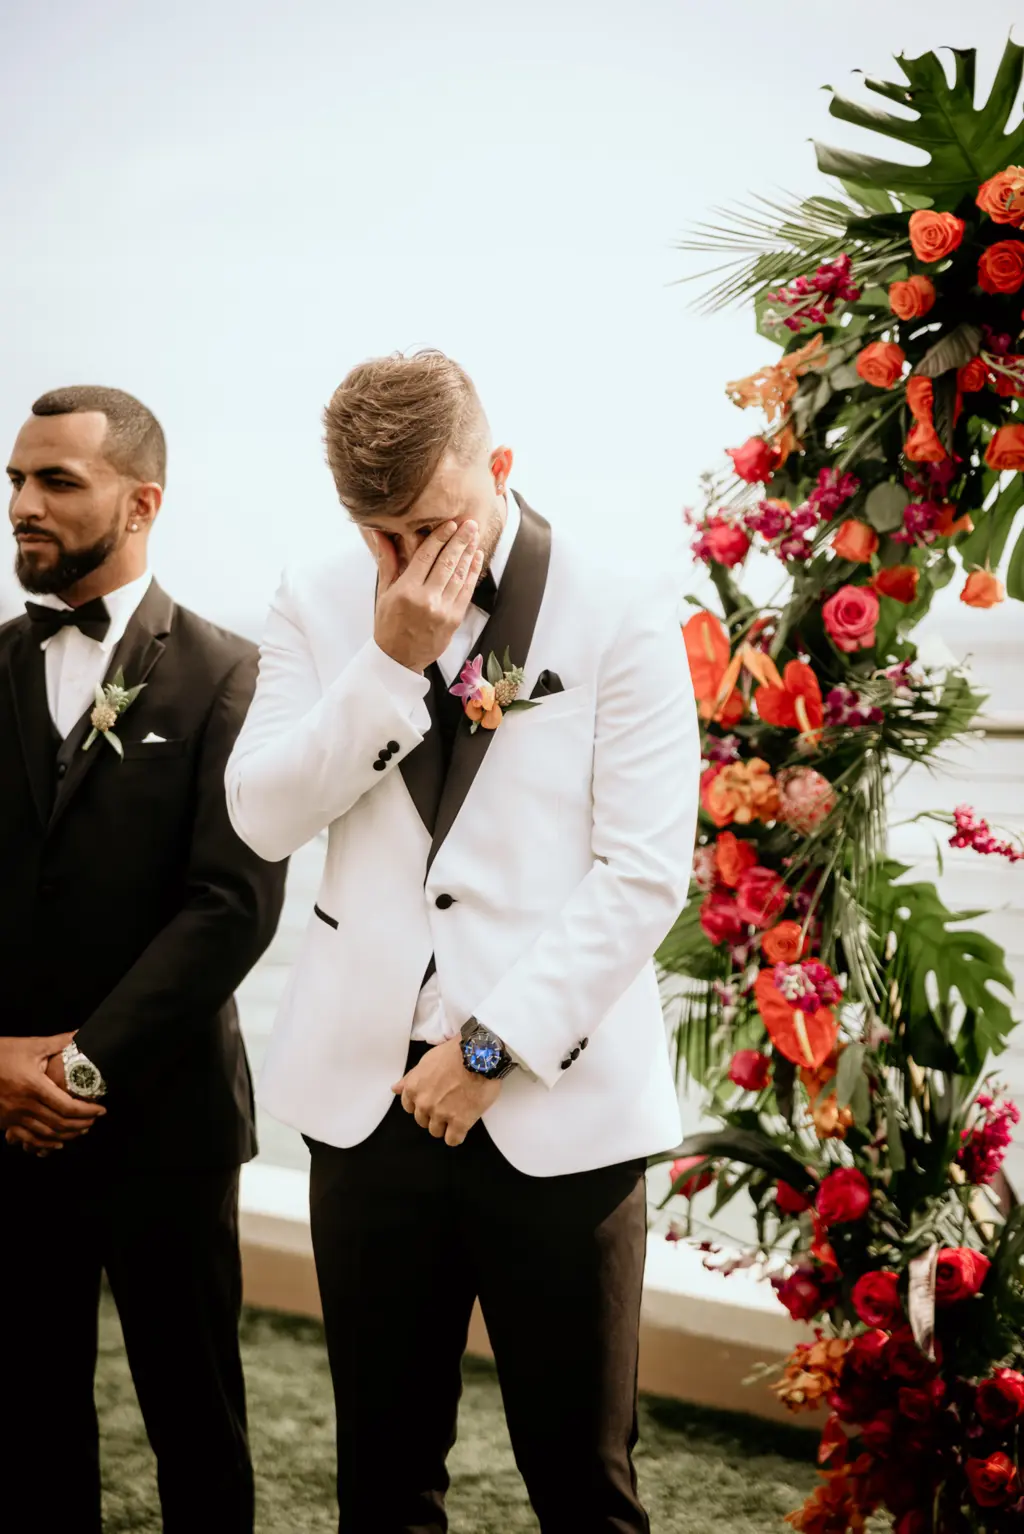 Groom Sees Bride for the First Time Wedding Portrait